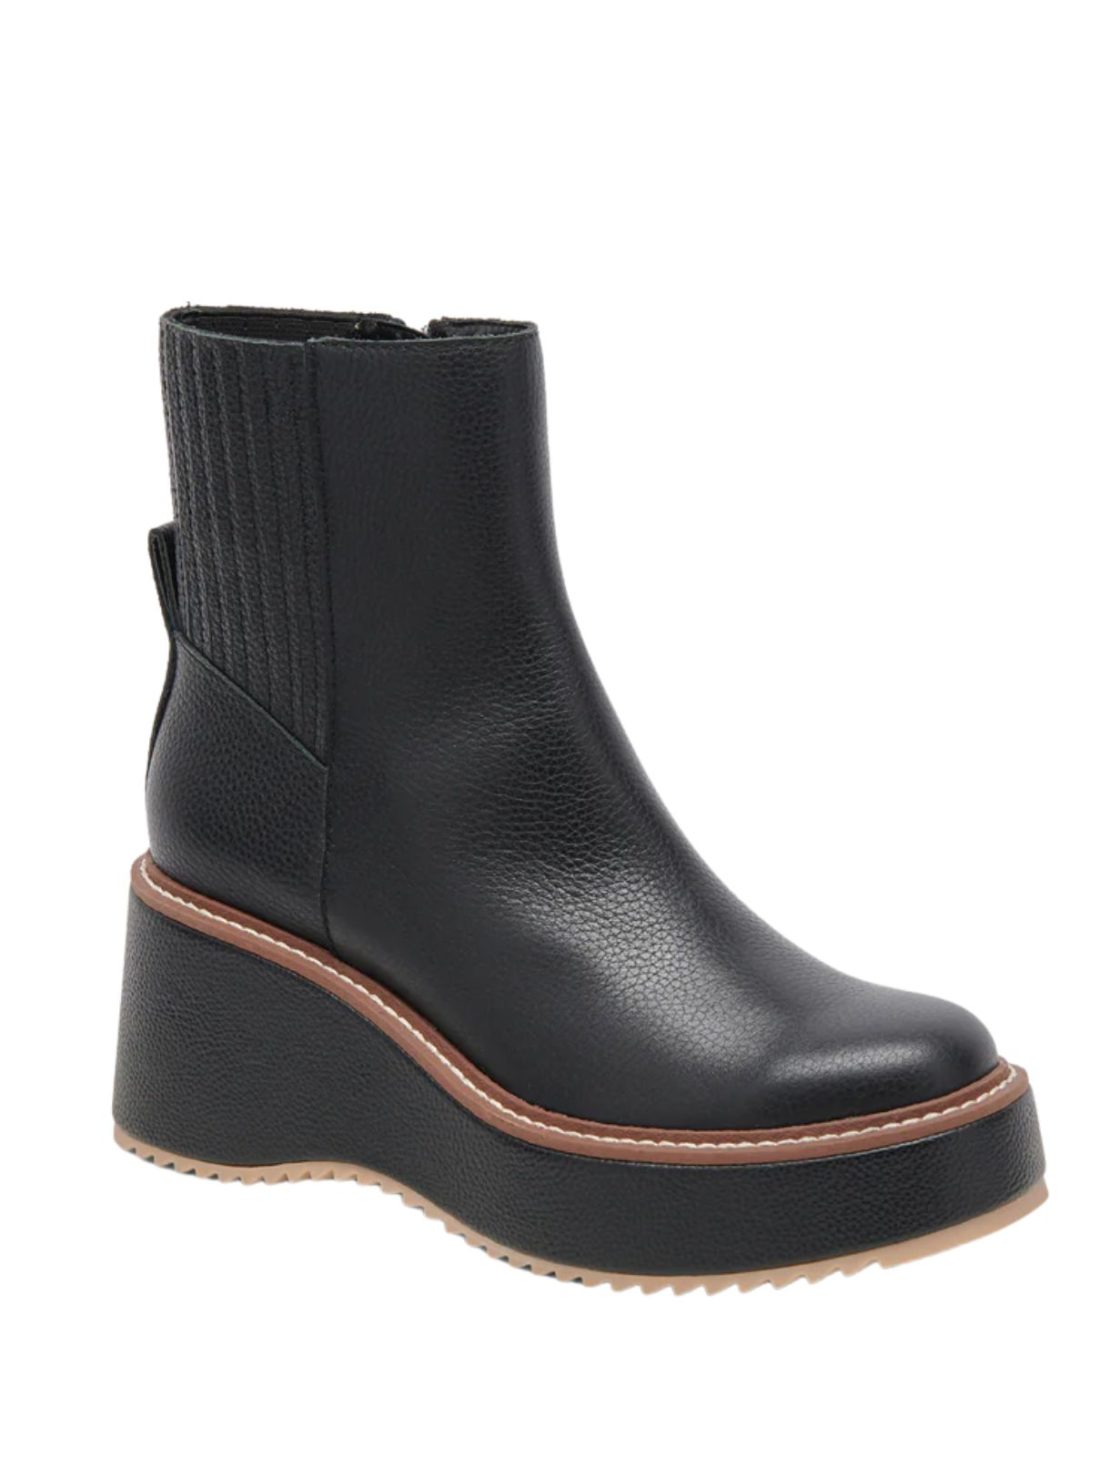 dolce vita hilde boot in black leather